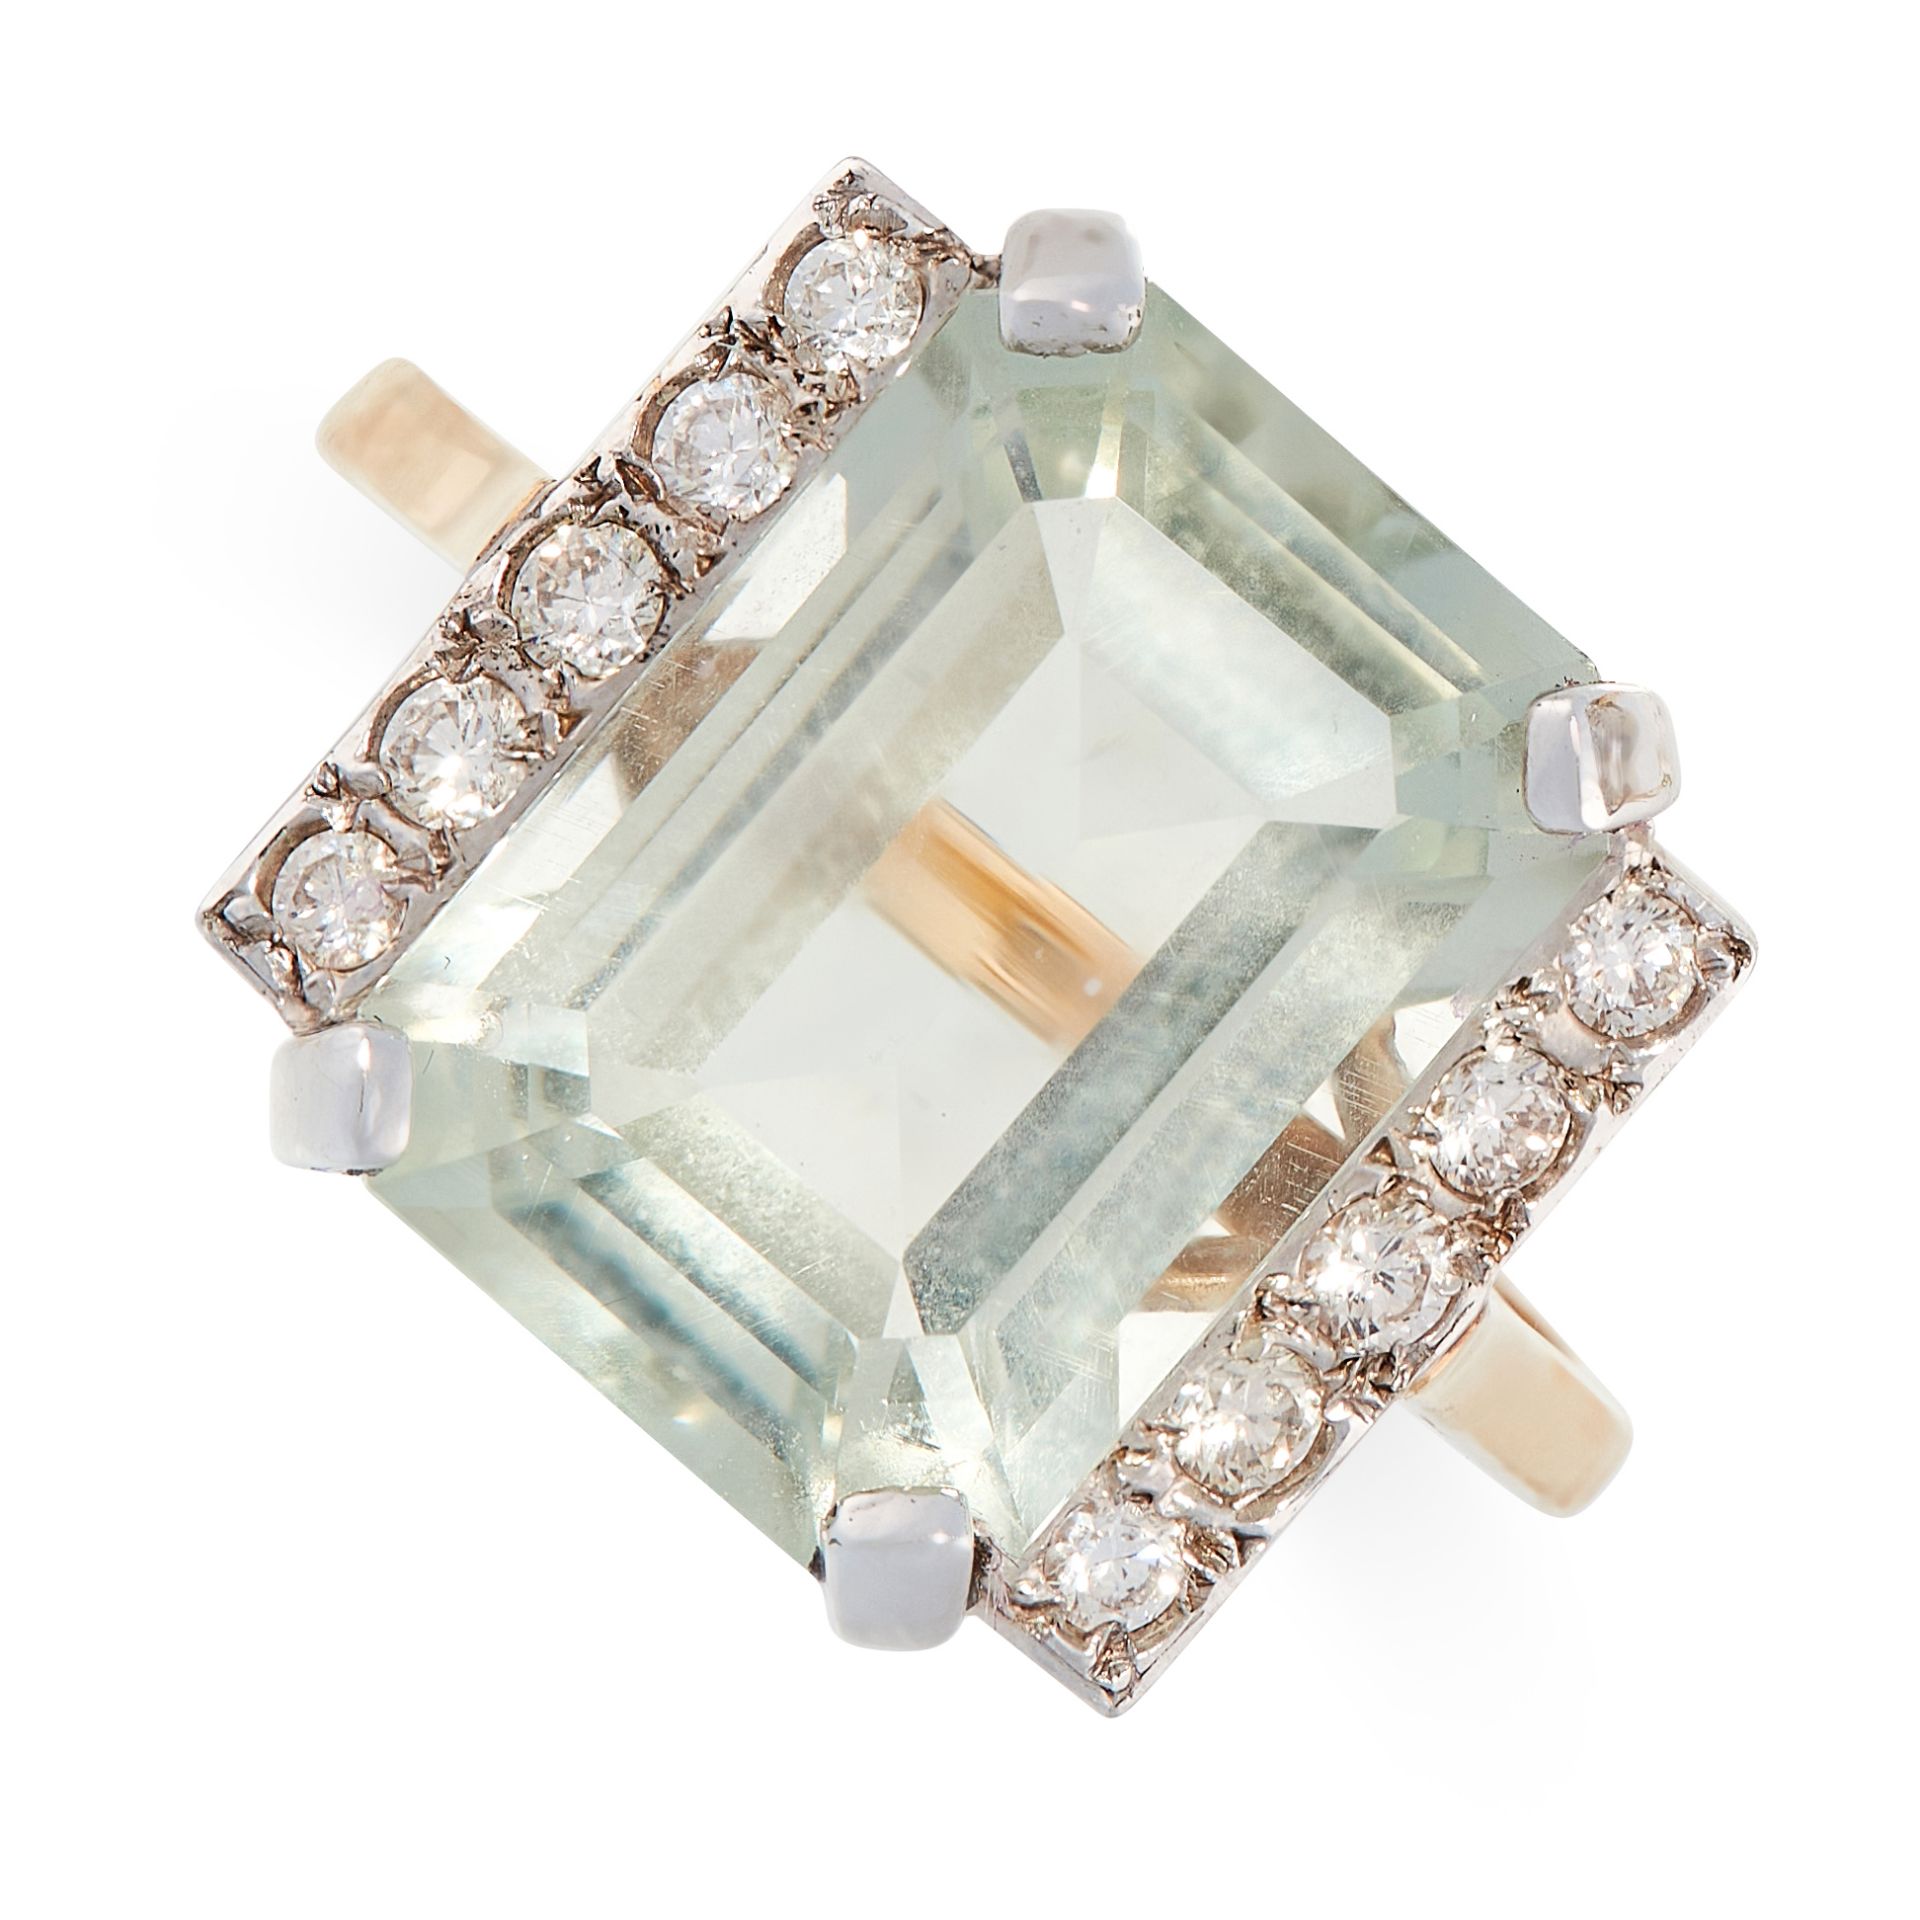 A PRASIOLITE AND DIAMOND RING in yellow gold, set with an emerald cut prasiolite accented by two